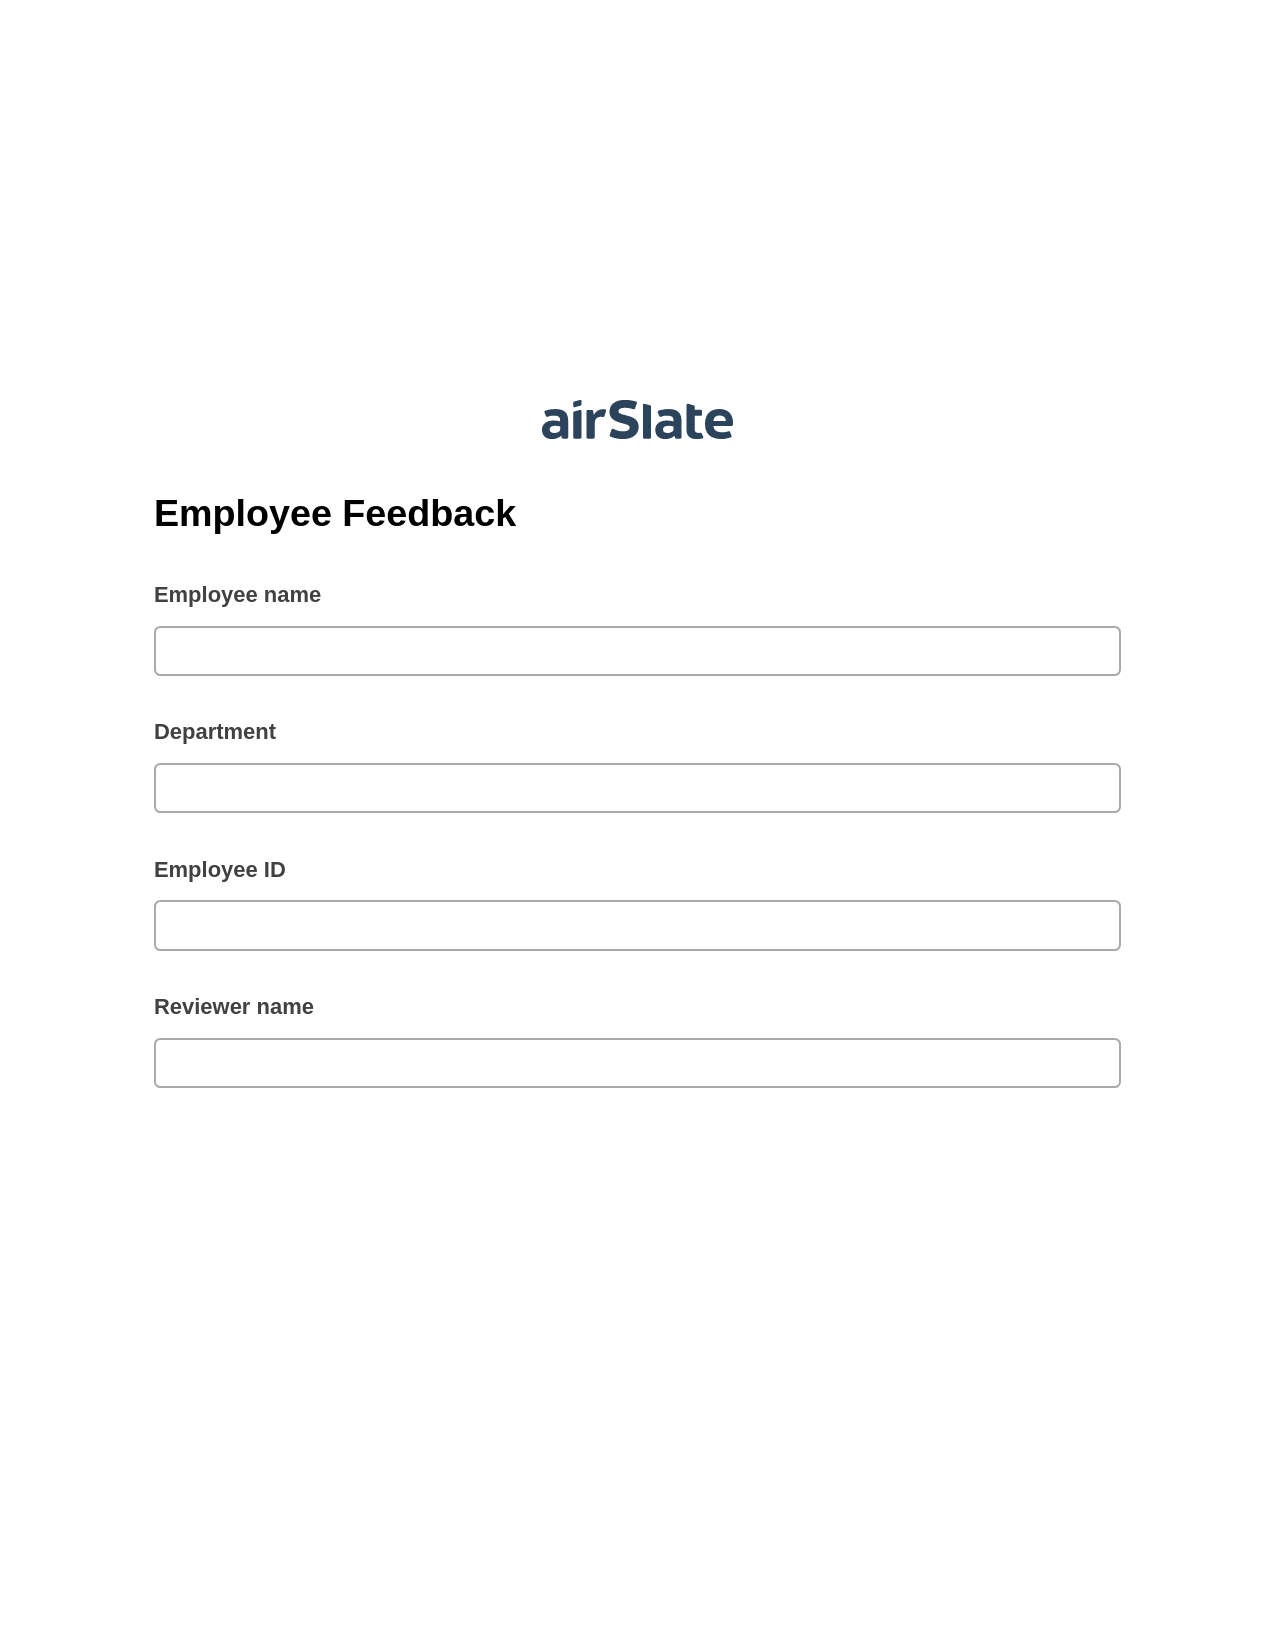 Employee Feedback Pre-fill from CSV File Bot, Assign Roles to Recipients Bot, Export to MySQL Bot